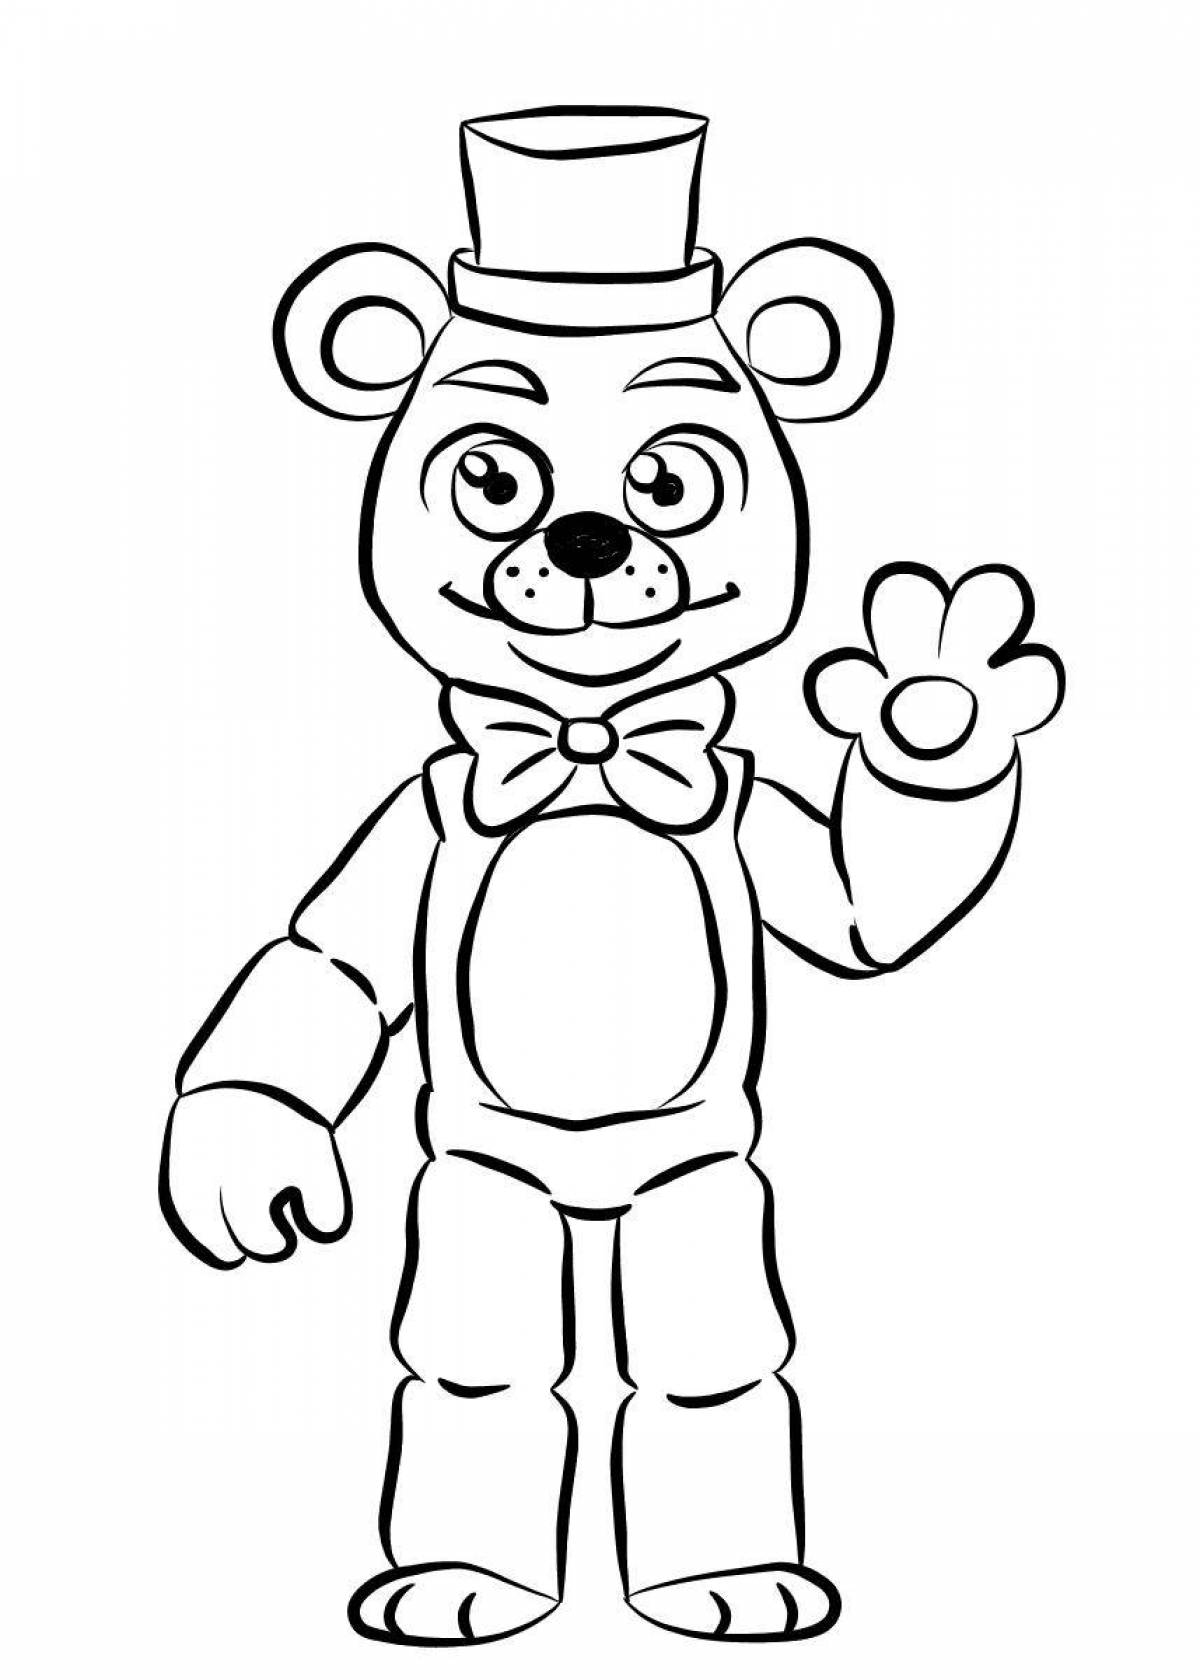 Funny freddy bear coloring book